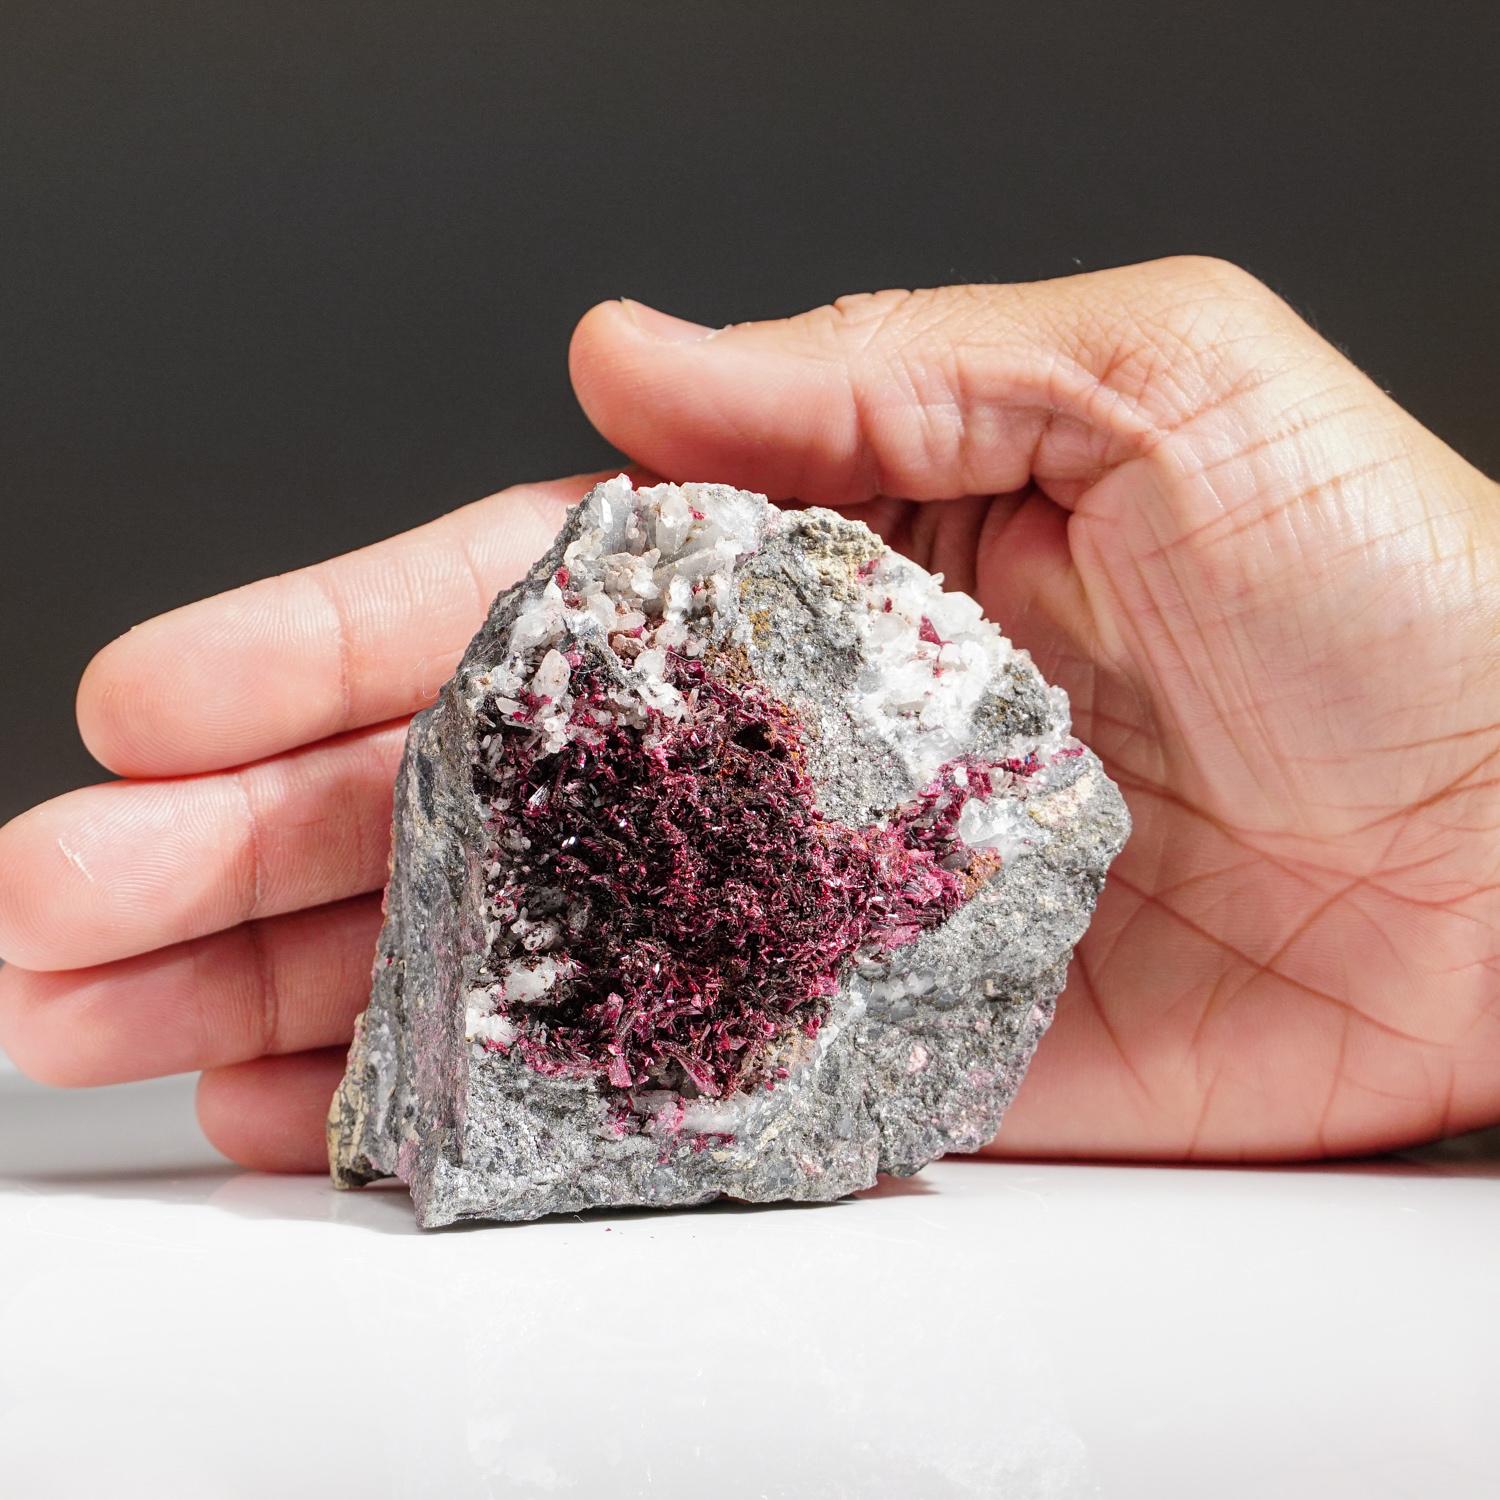 From Bou Azer District, Tazenakht, Ouarzazate Province, Souss-Massa-Draâ Region, MoroccoLustrous specimen with several cavities lined with intersecting translucent deep violet purple erythrite crystals. Beautiful color contrast with rich purple